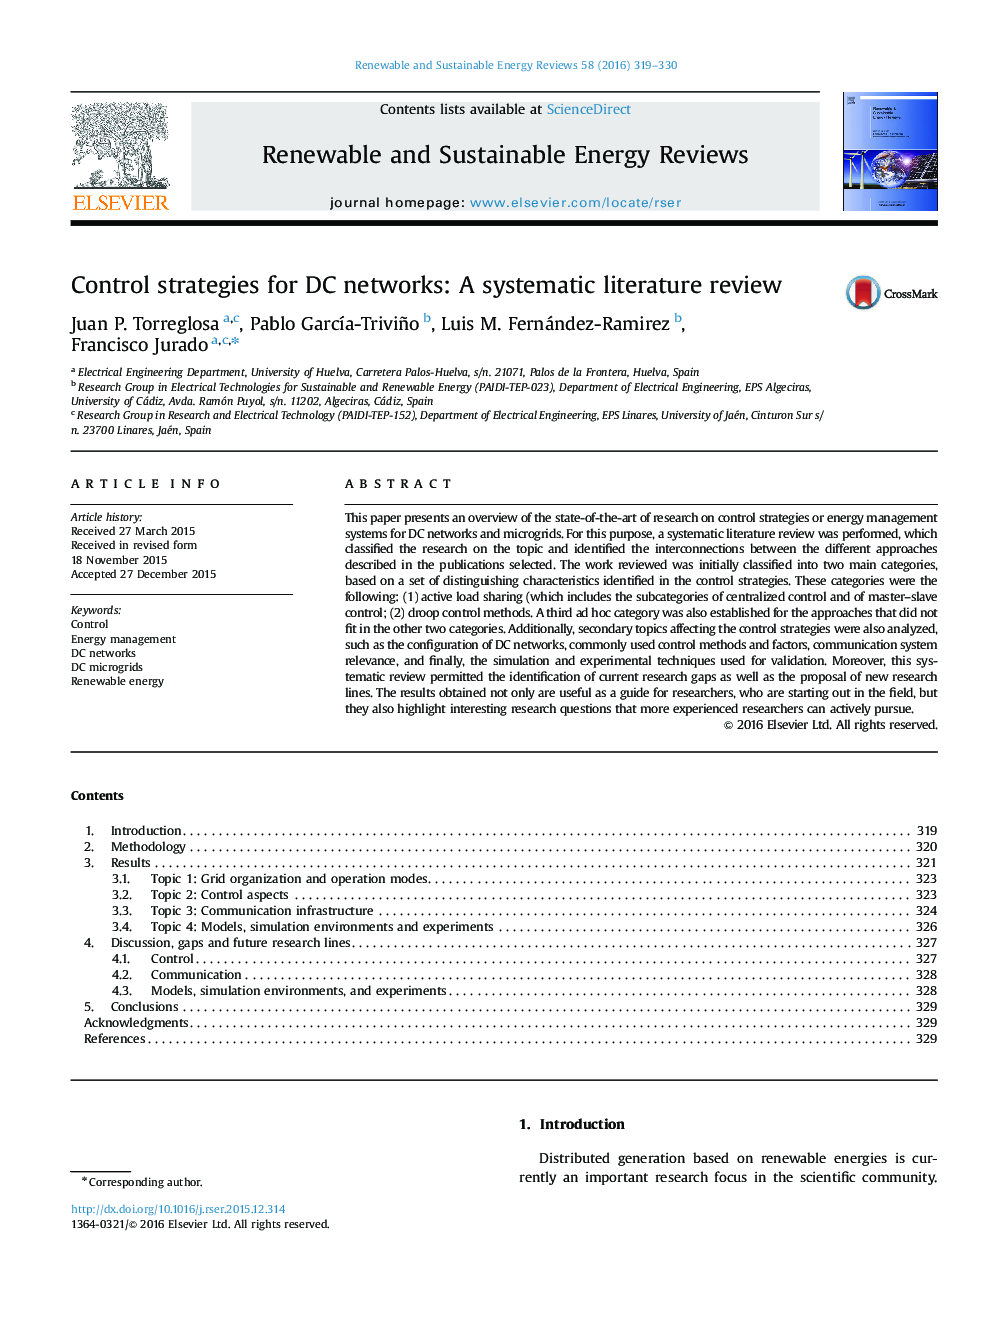 Control strategies for DC networks: A systematic literature review